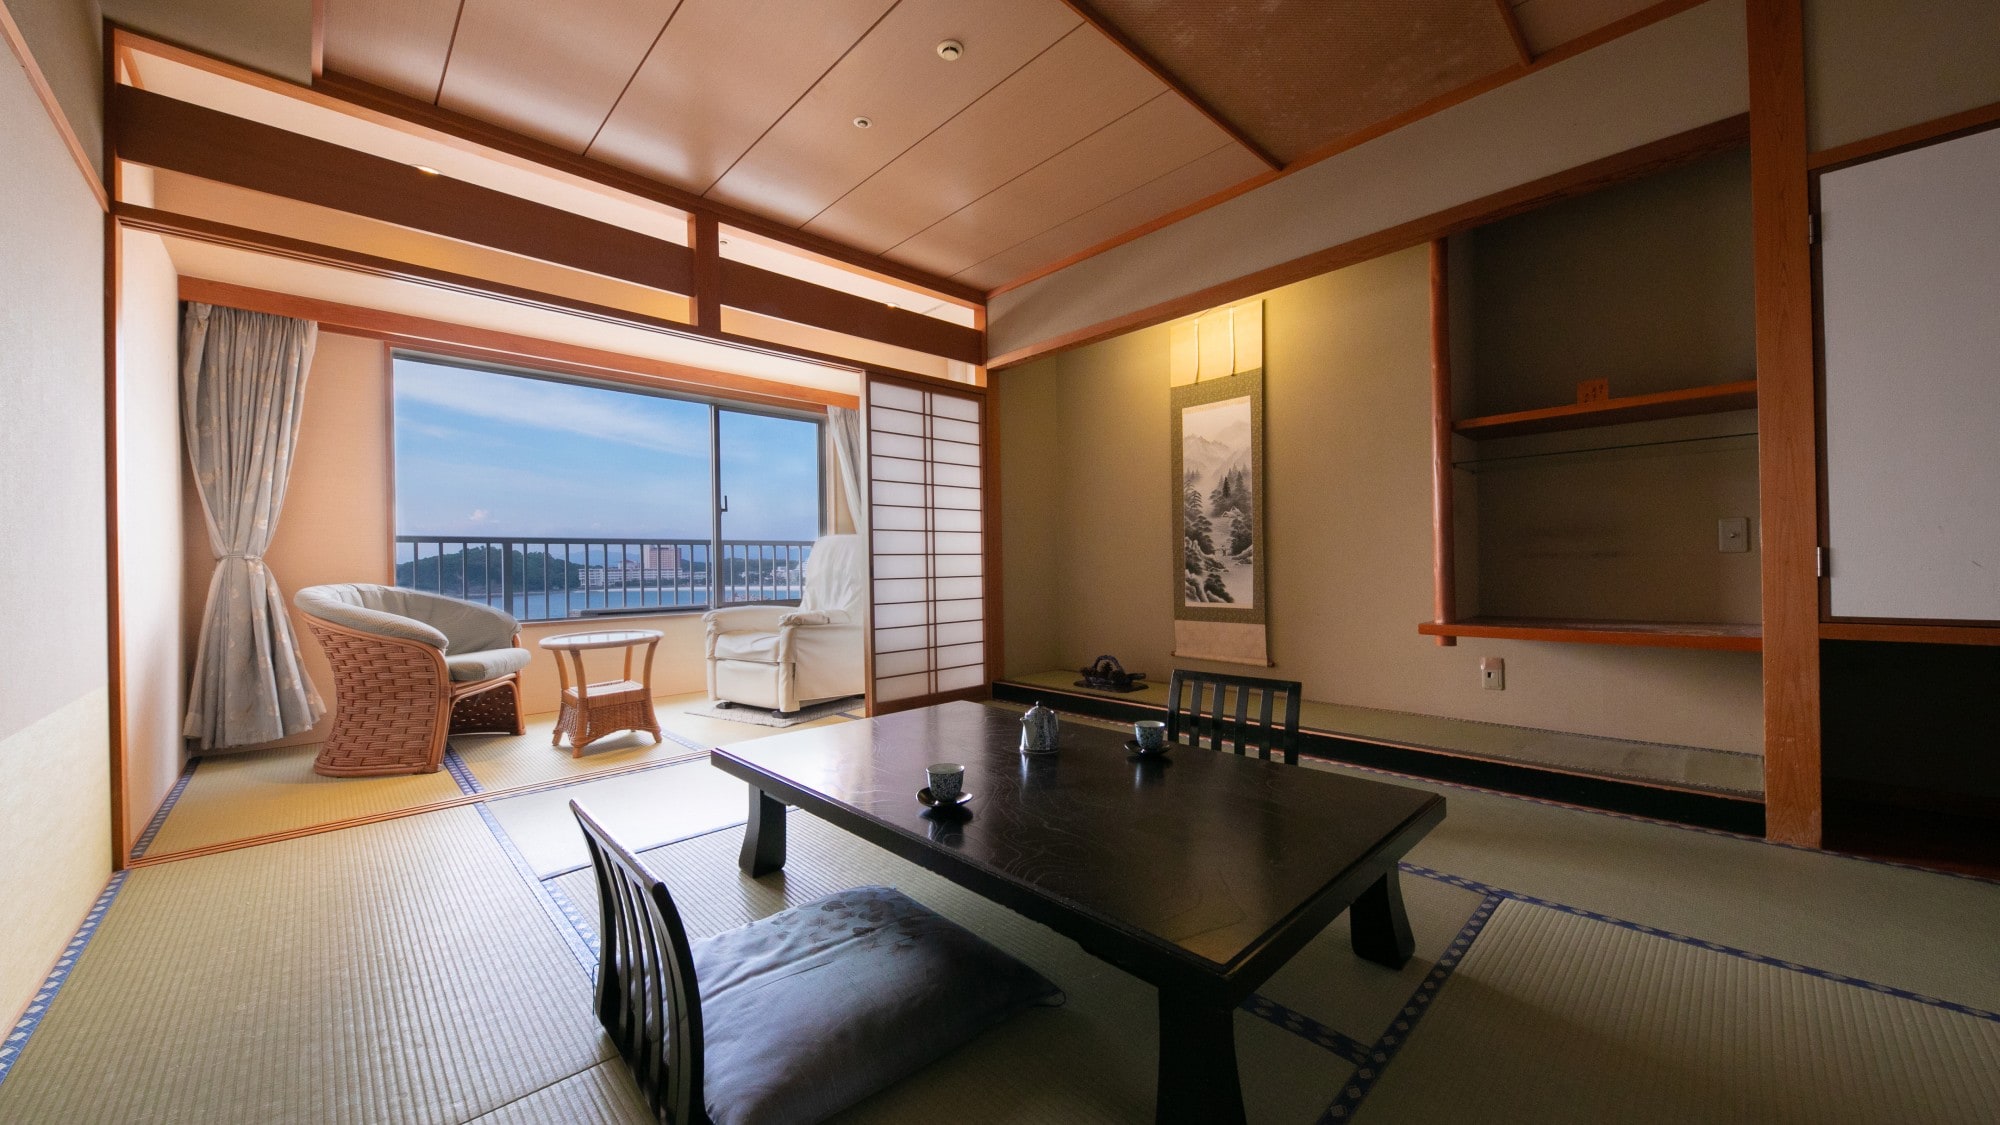 An example of a Japanese-style room